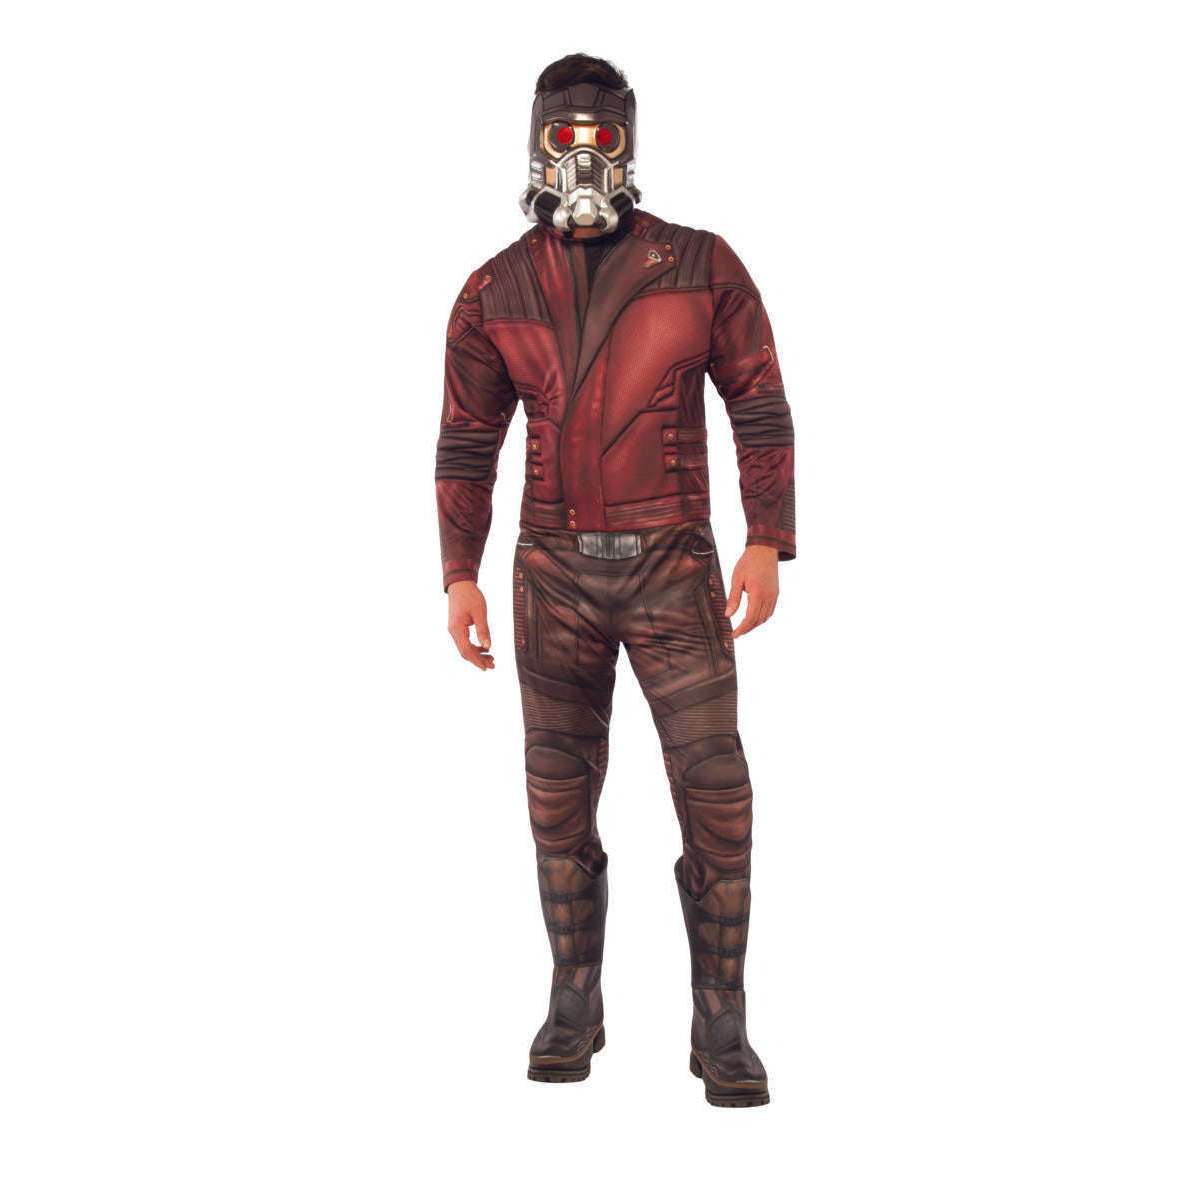 Guardians Of The Galaxy Star-Lord Adult Costume